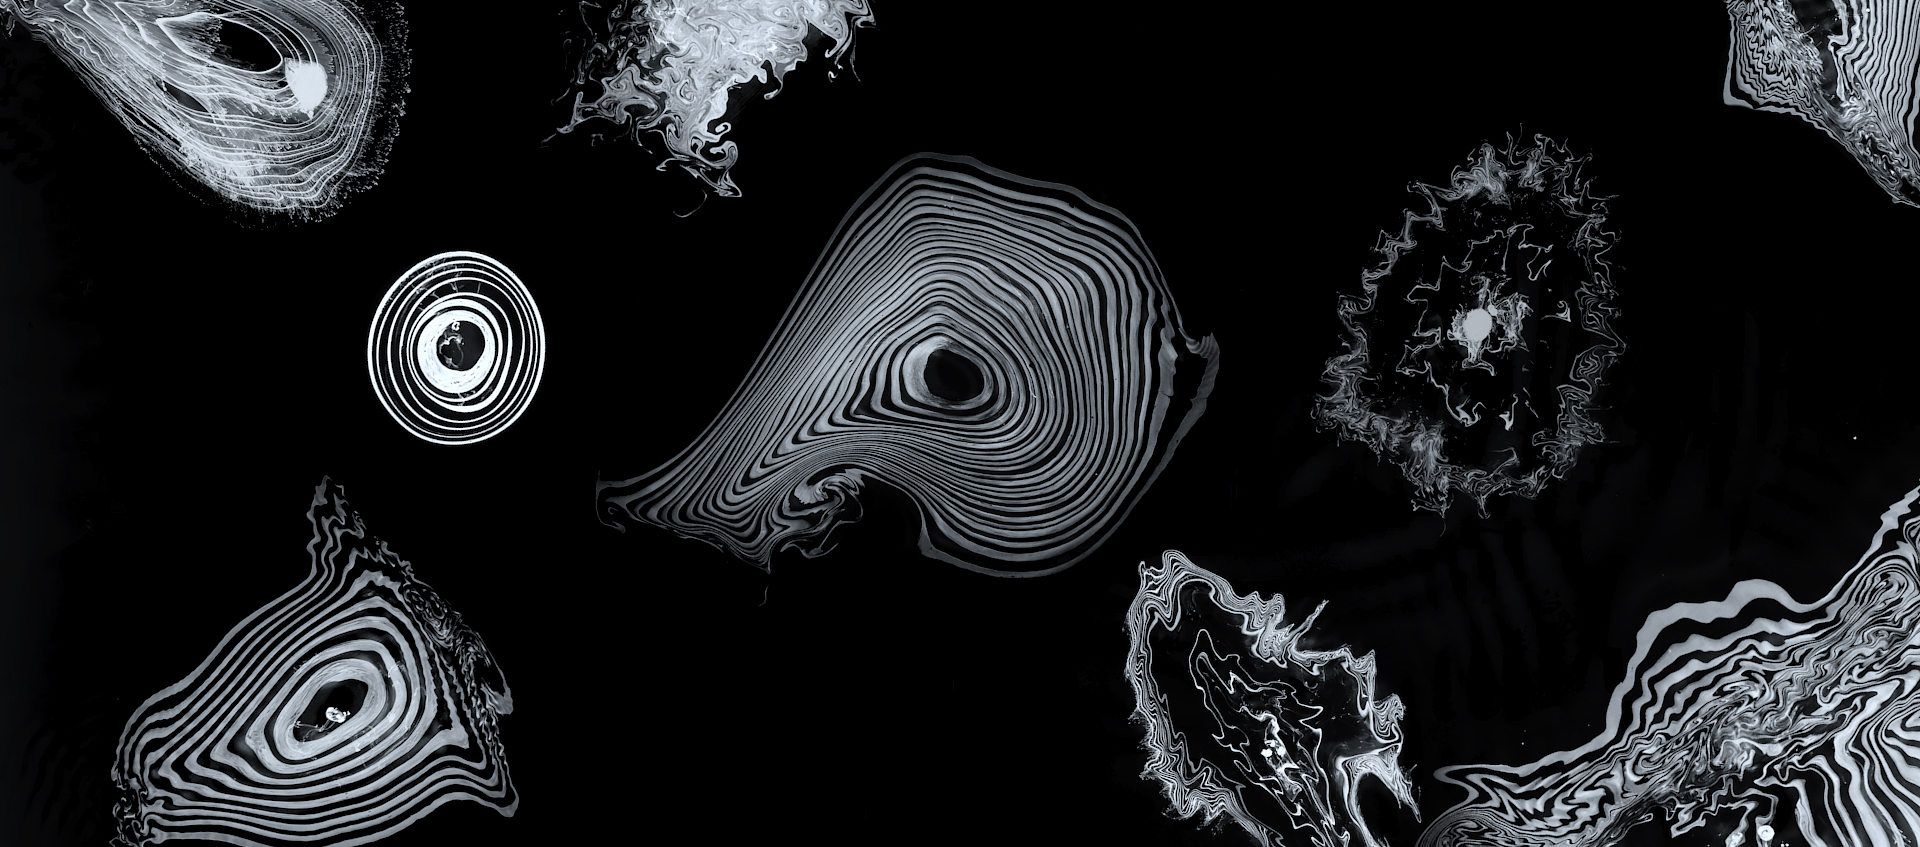 An assortment of abstract, ripple-effect-like patterns in white appear on a black background.